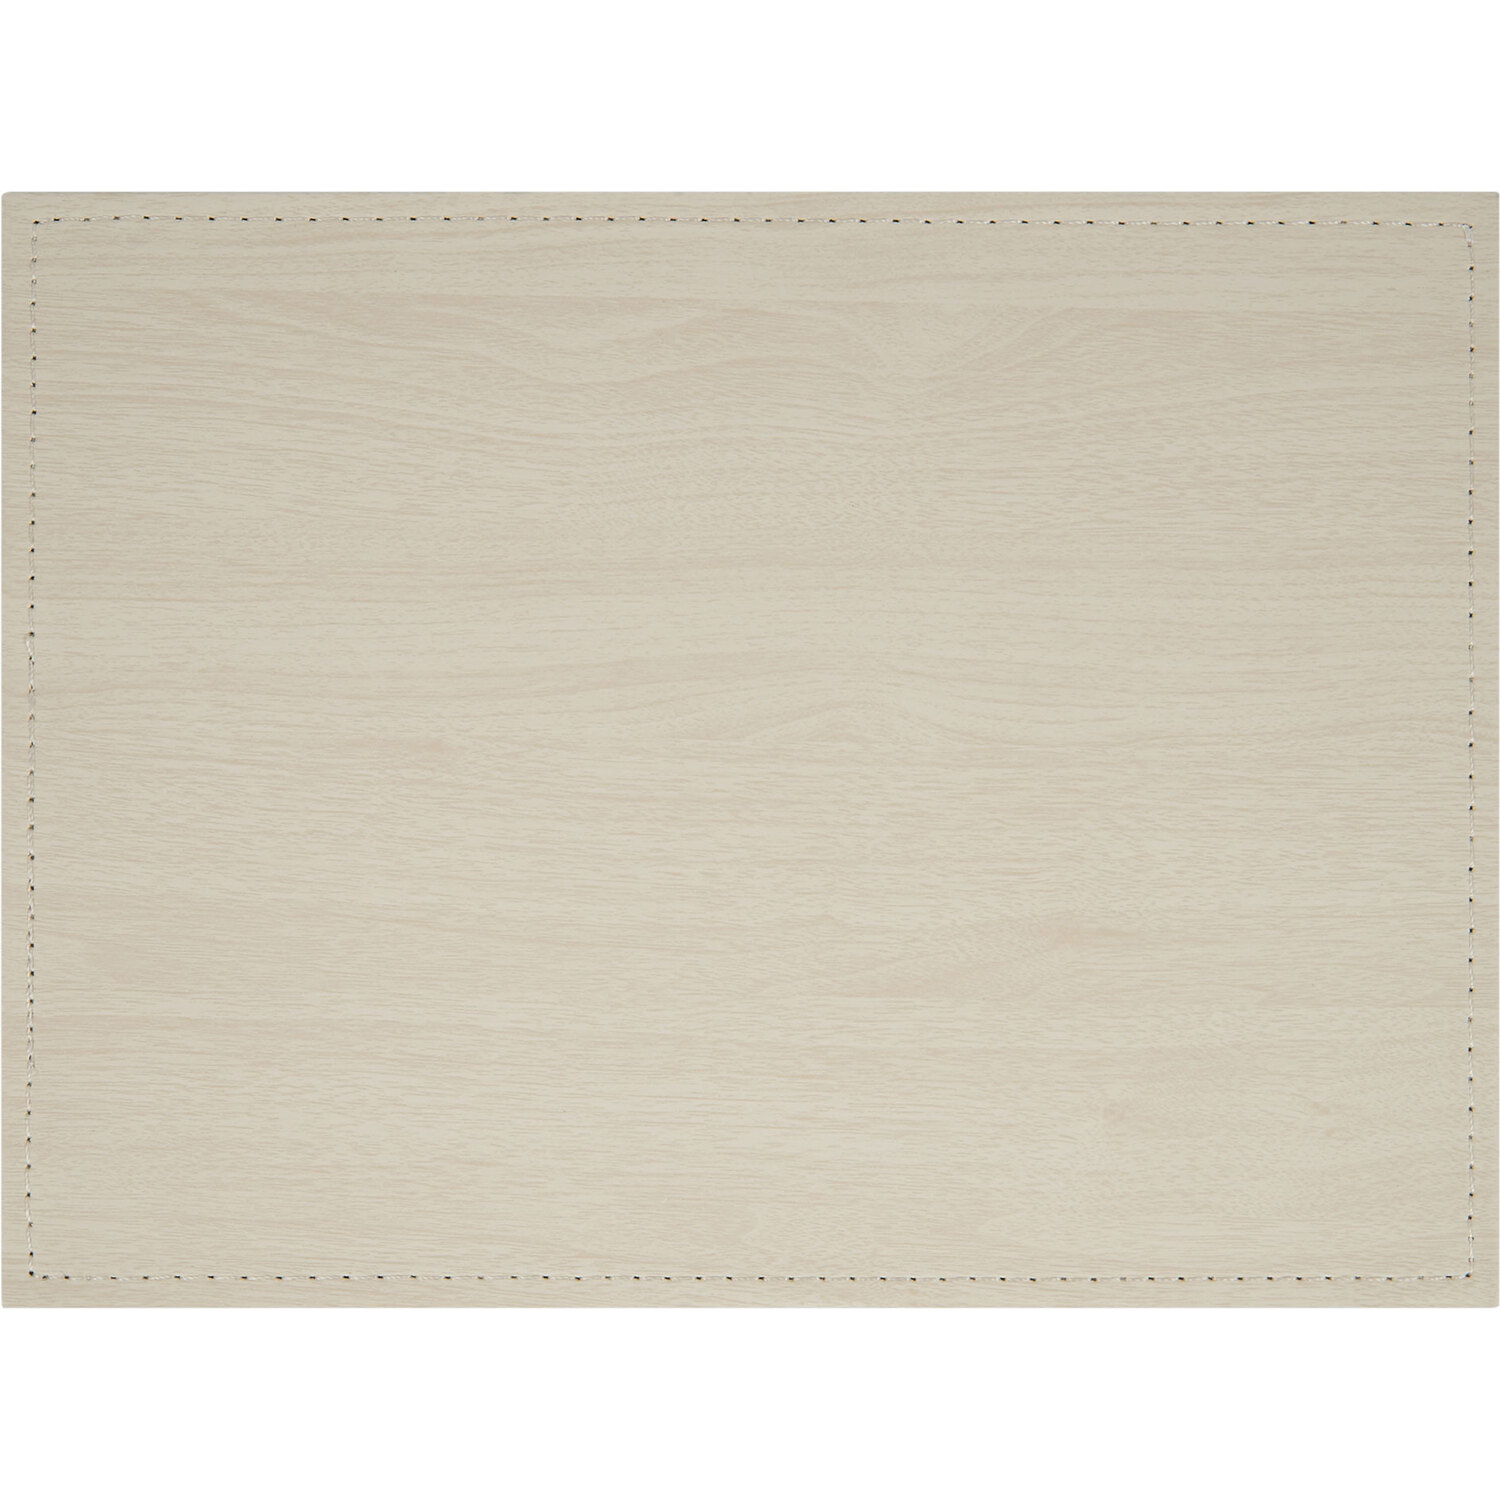 Pack of 4 Fusion Faux Leather Placemats - Natural Image 3